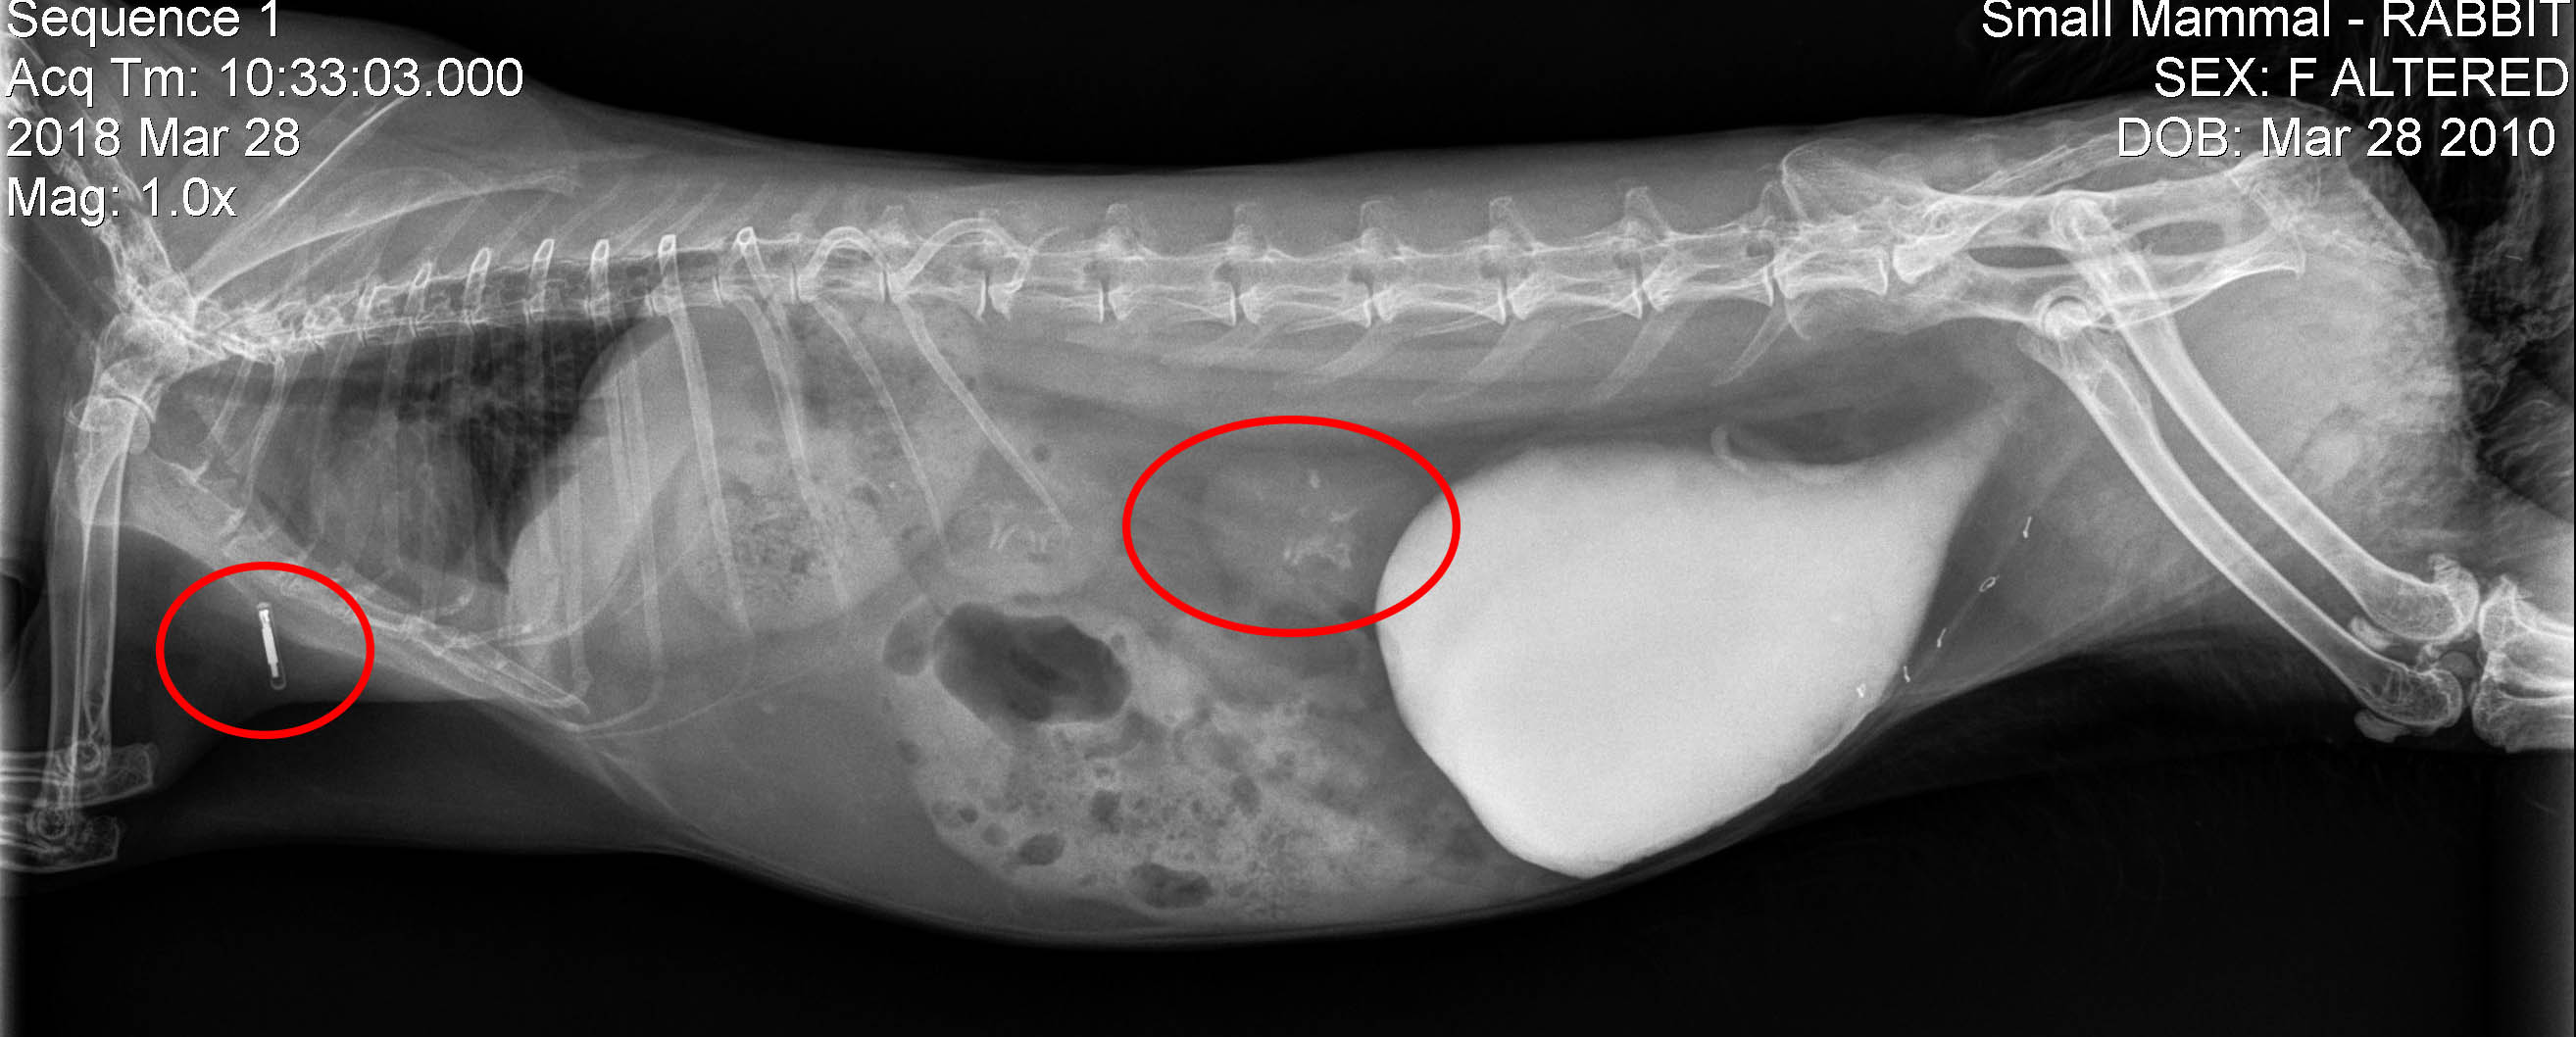 Calcified kidneys and a microchip in a rabbit